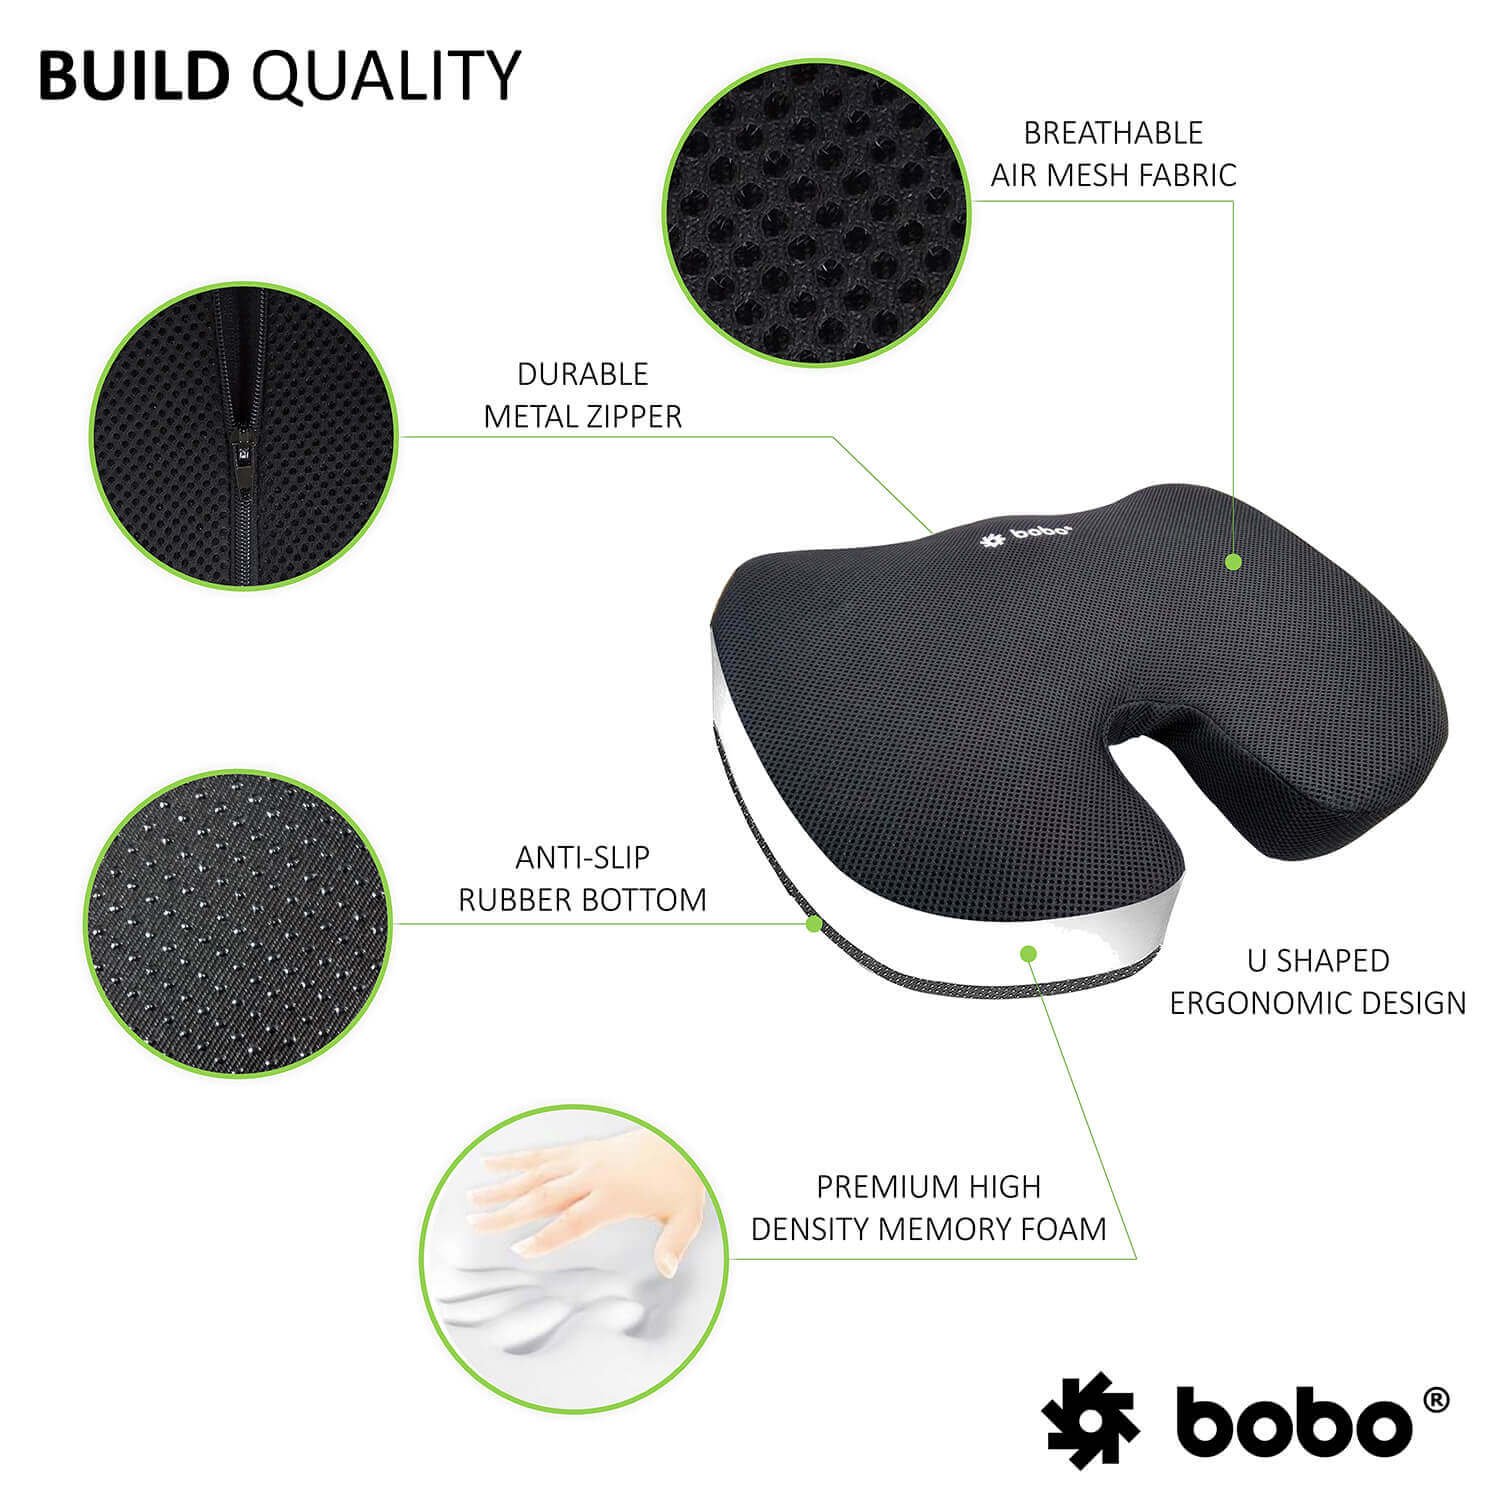 LARROUS Car Memory Foam Heightening Seat Cushion,Tailbone (Coccyx) and  Lower Back Pain Relief Cushion,for Office Chair,Wheelchair and More.